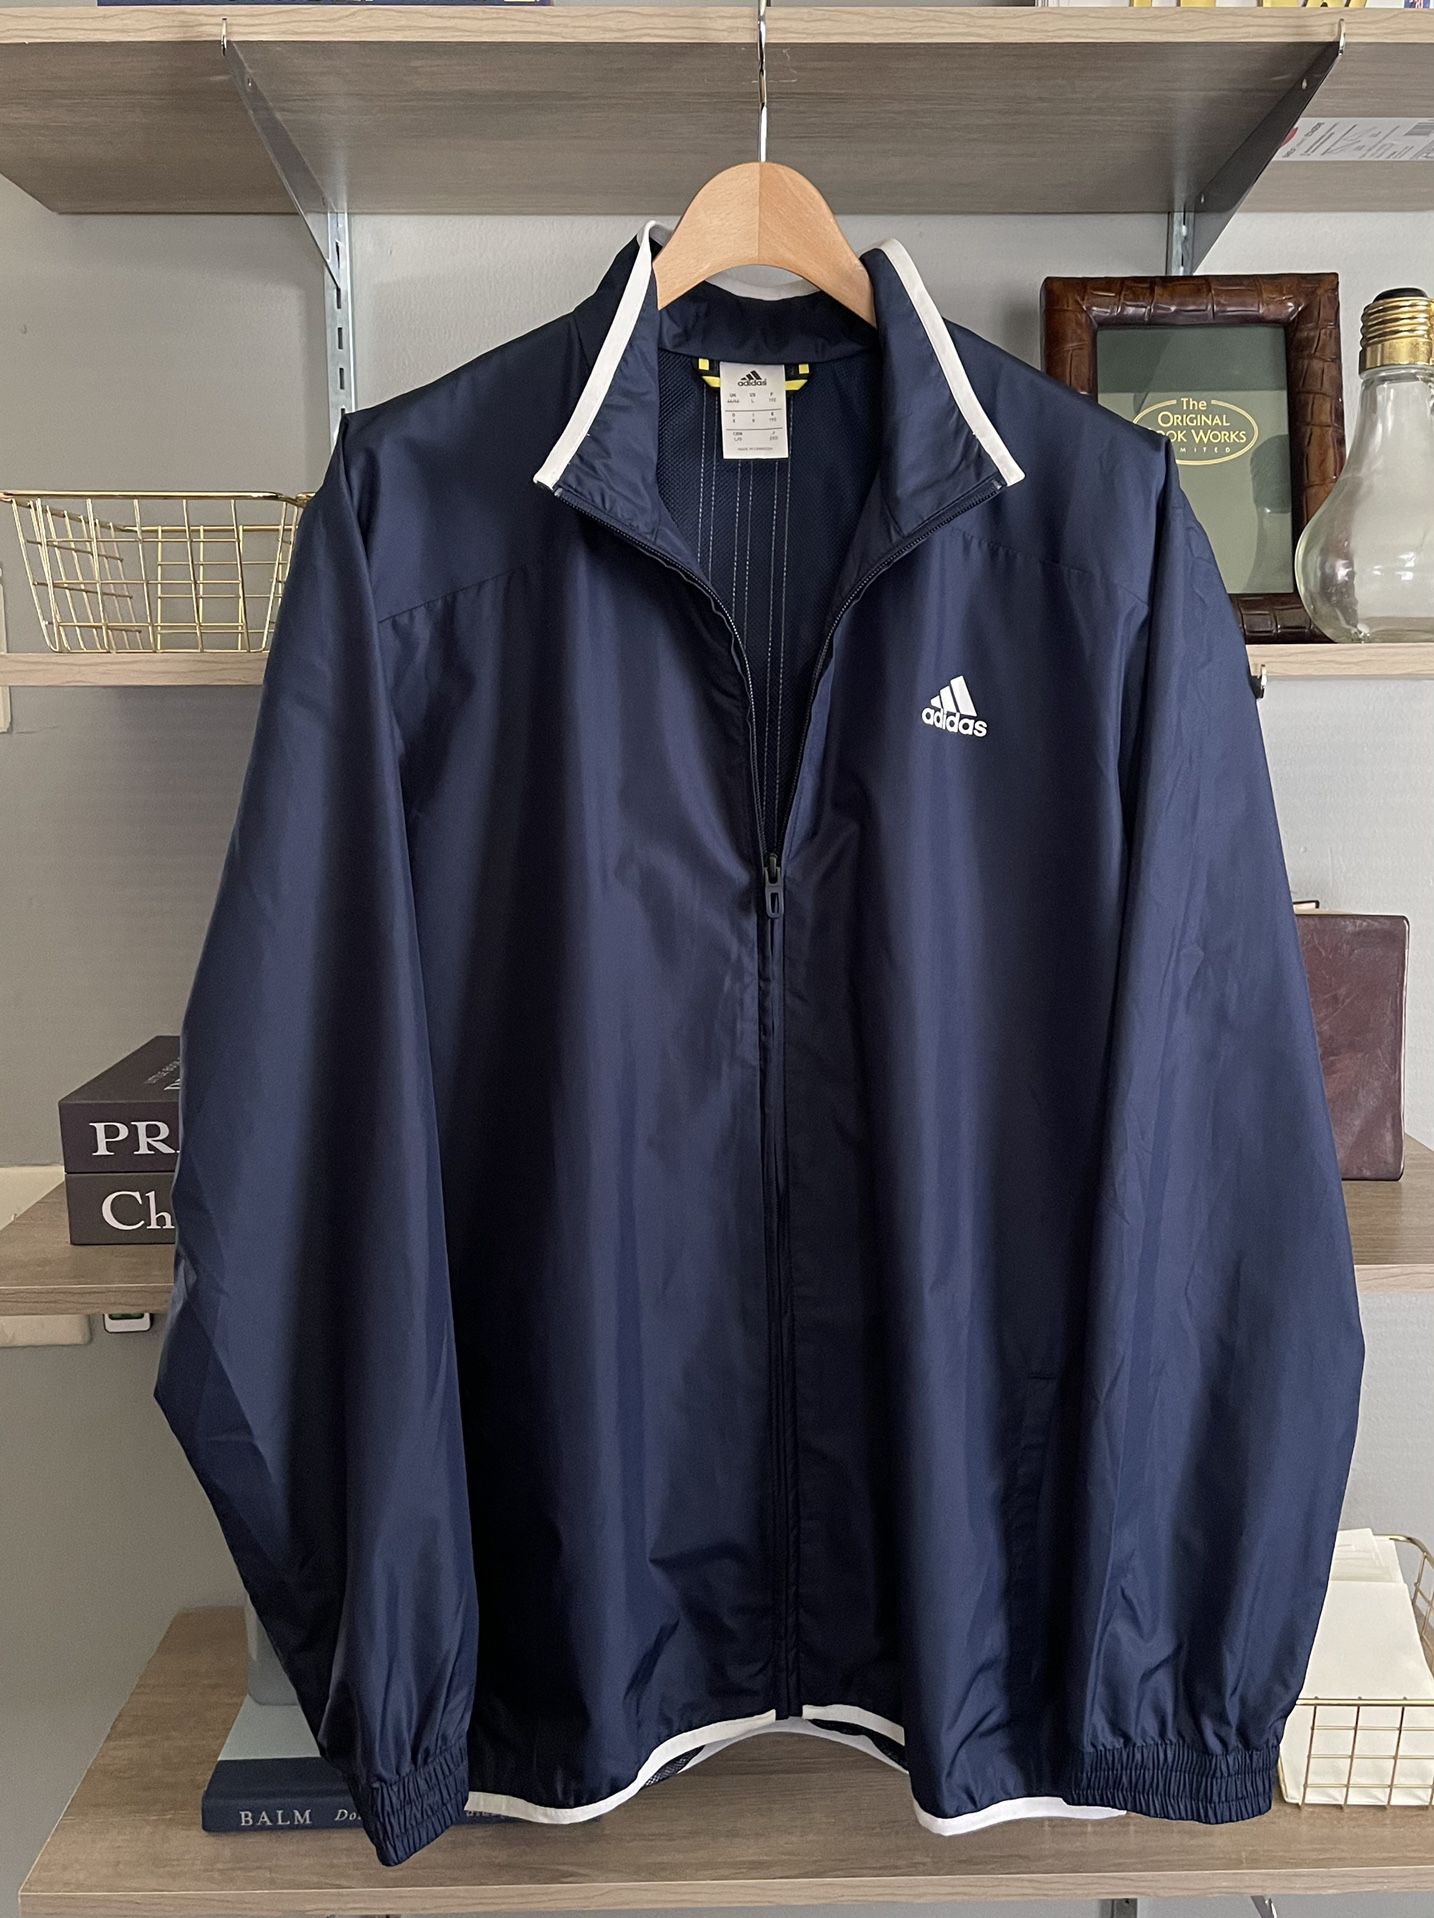 New! Mens Adidas windbreaker jacket size L retail $80 Brand new never worn. With pockets! Color navy blue